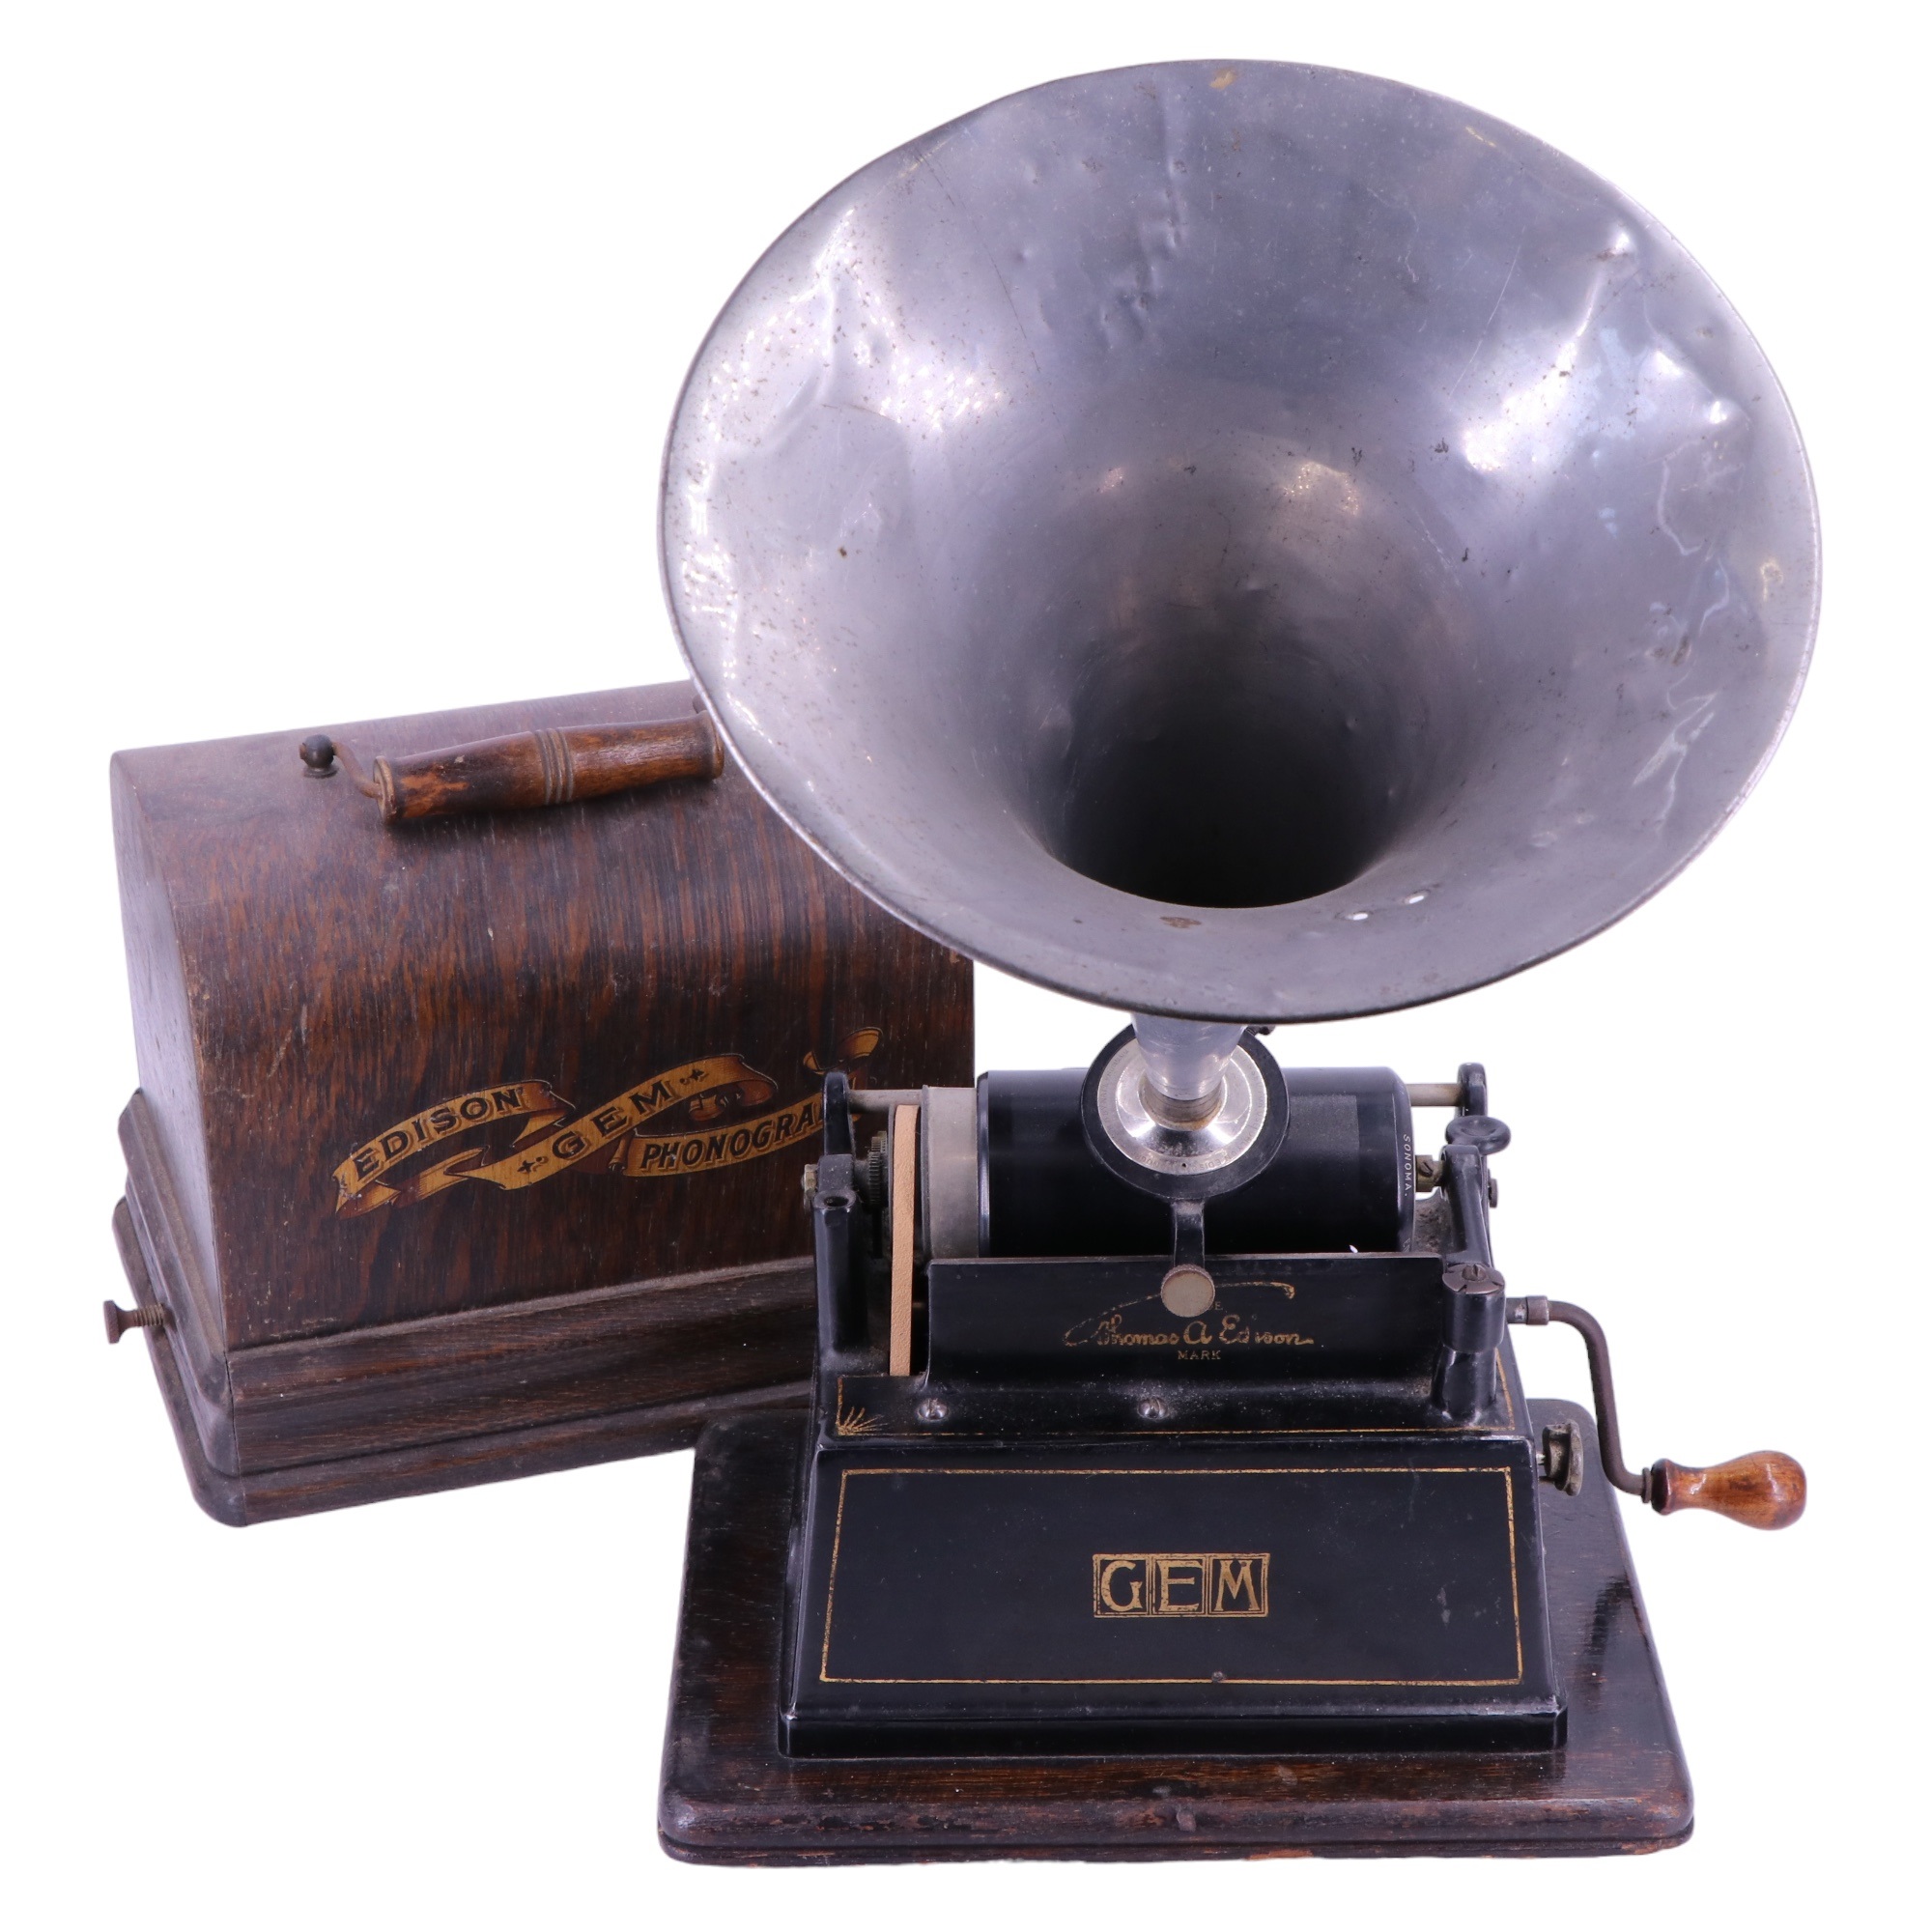 A late 19th / early 20th Century Edison Gem phonograph